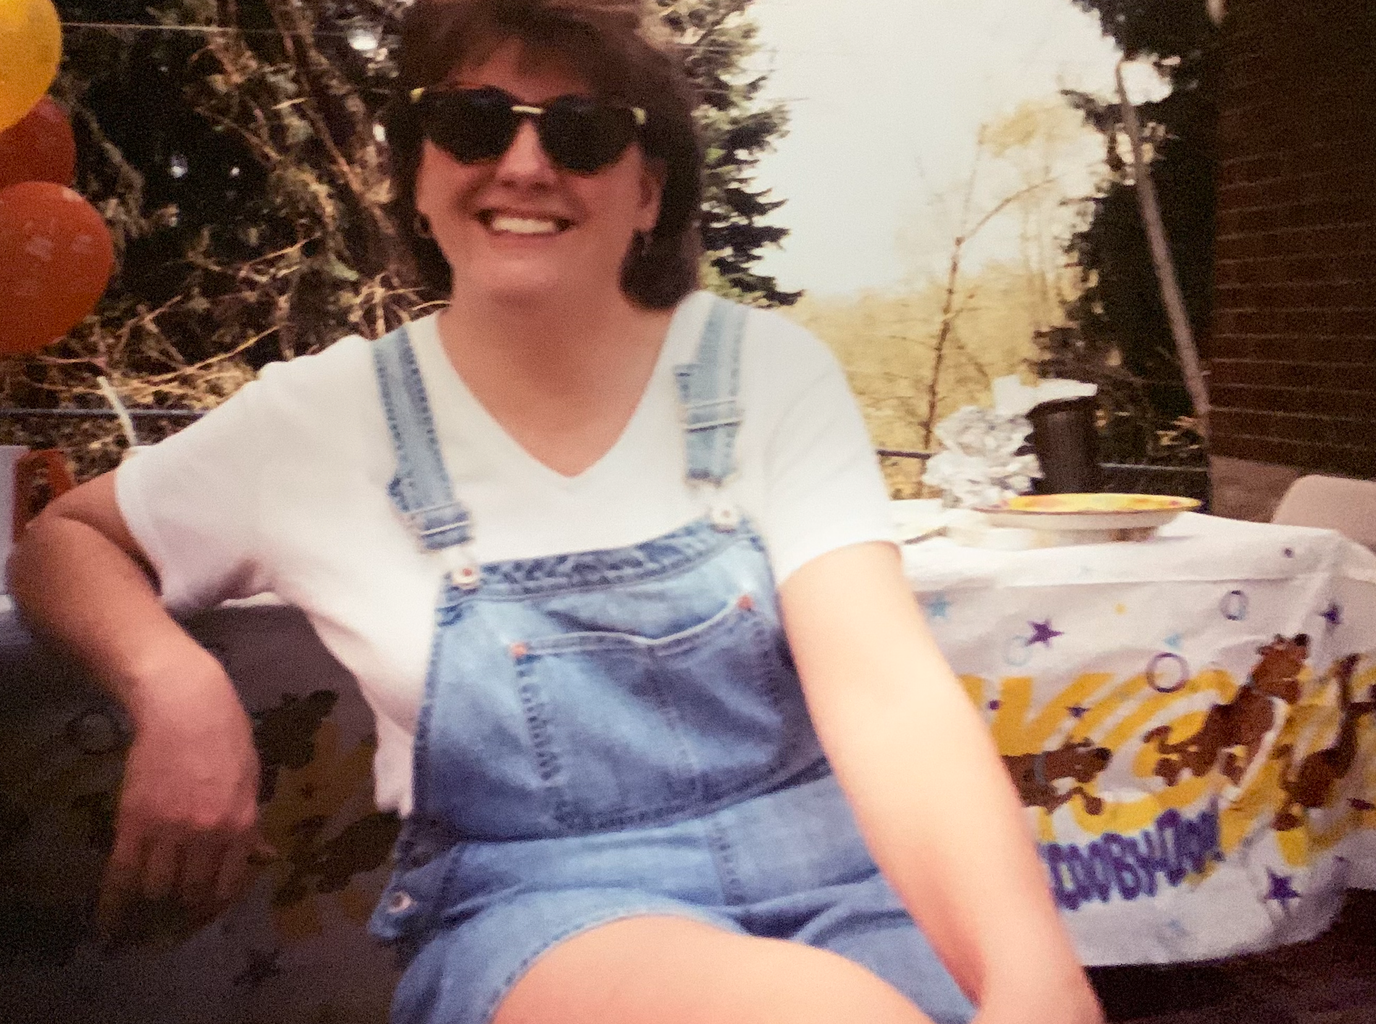 Woman smiling wearing overalls and large sun glasses.